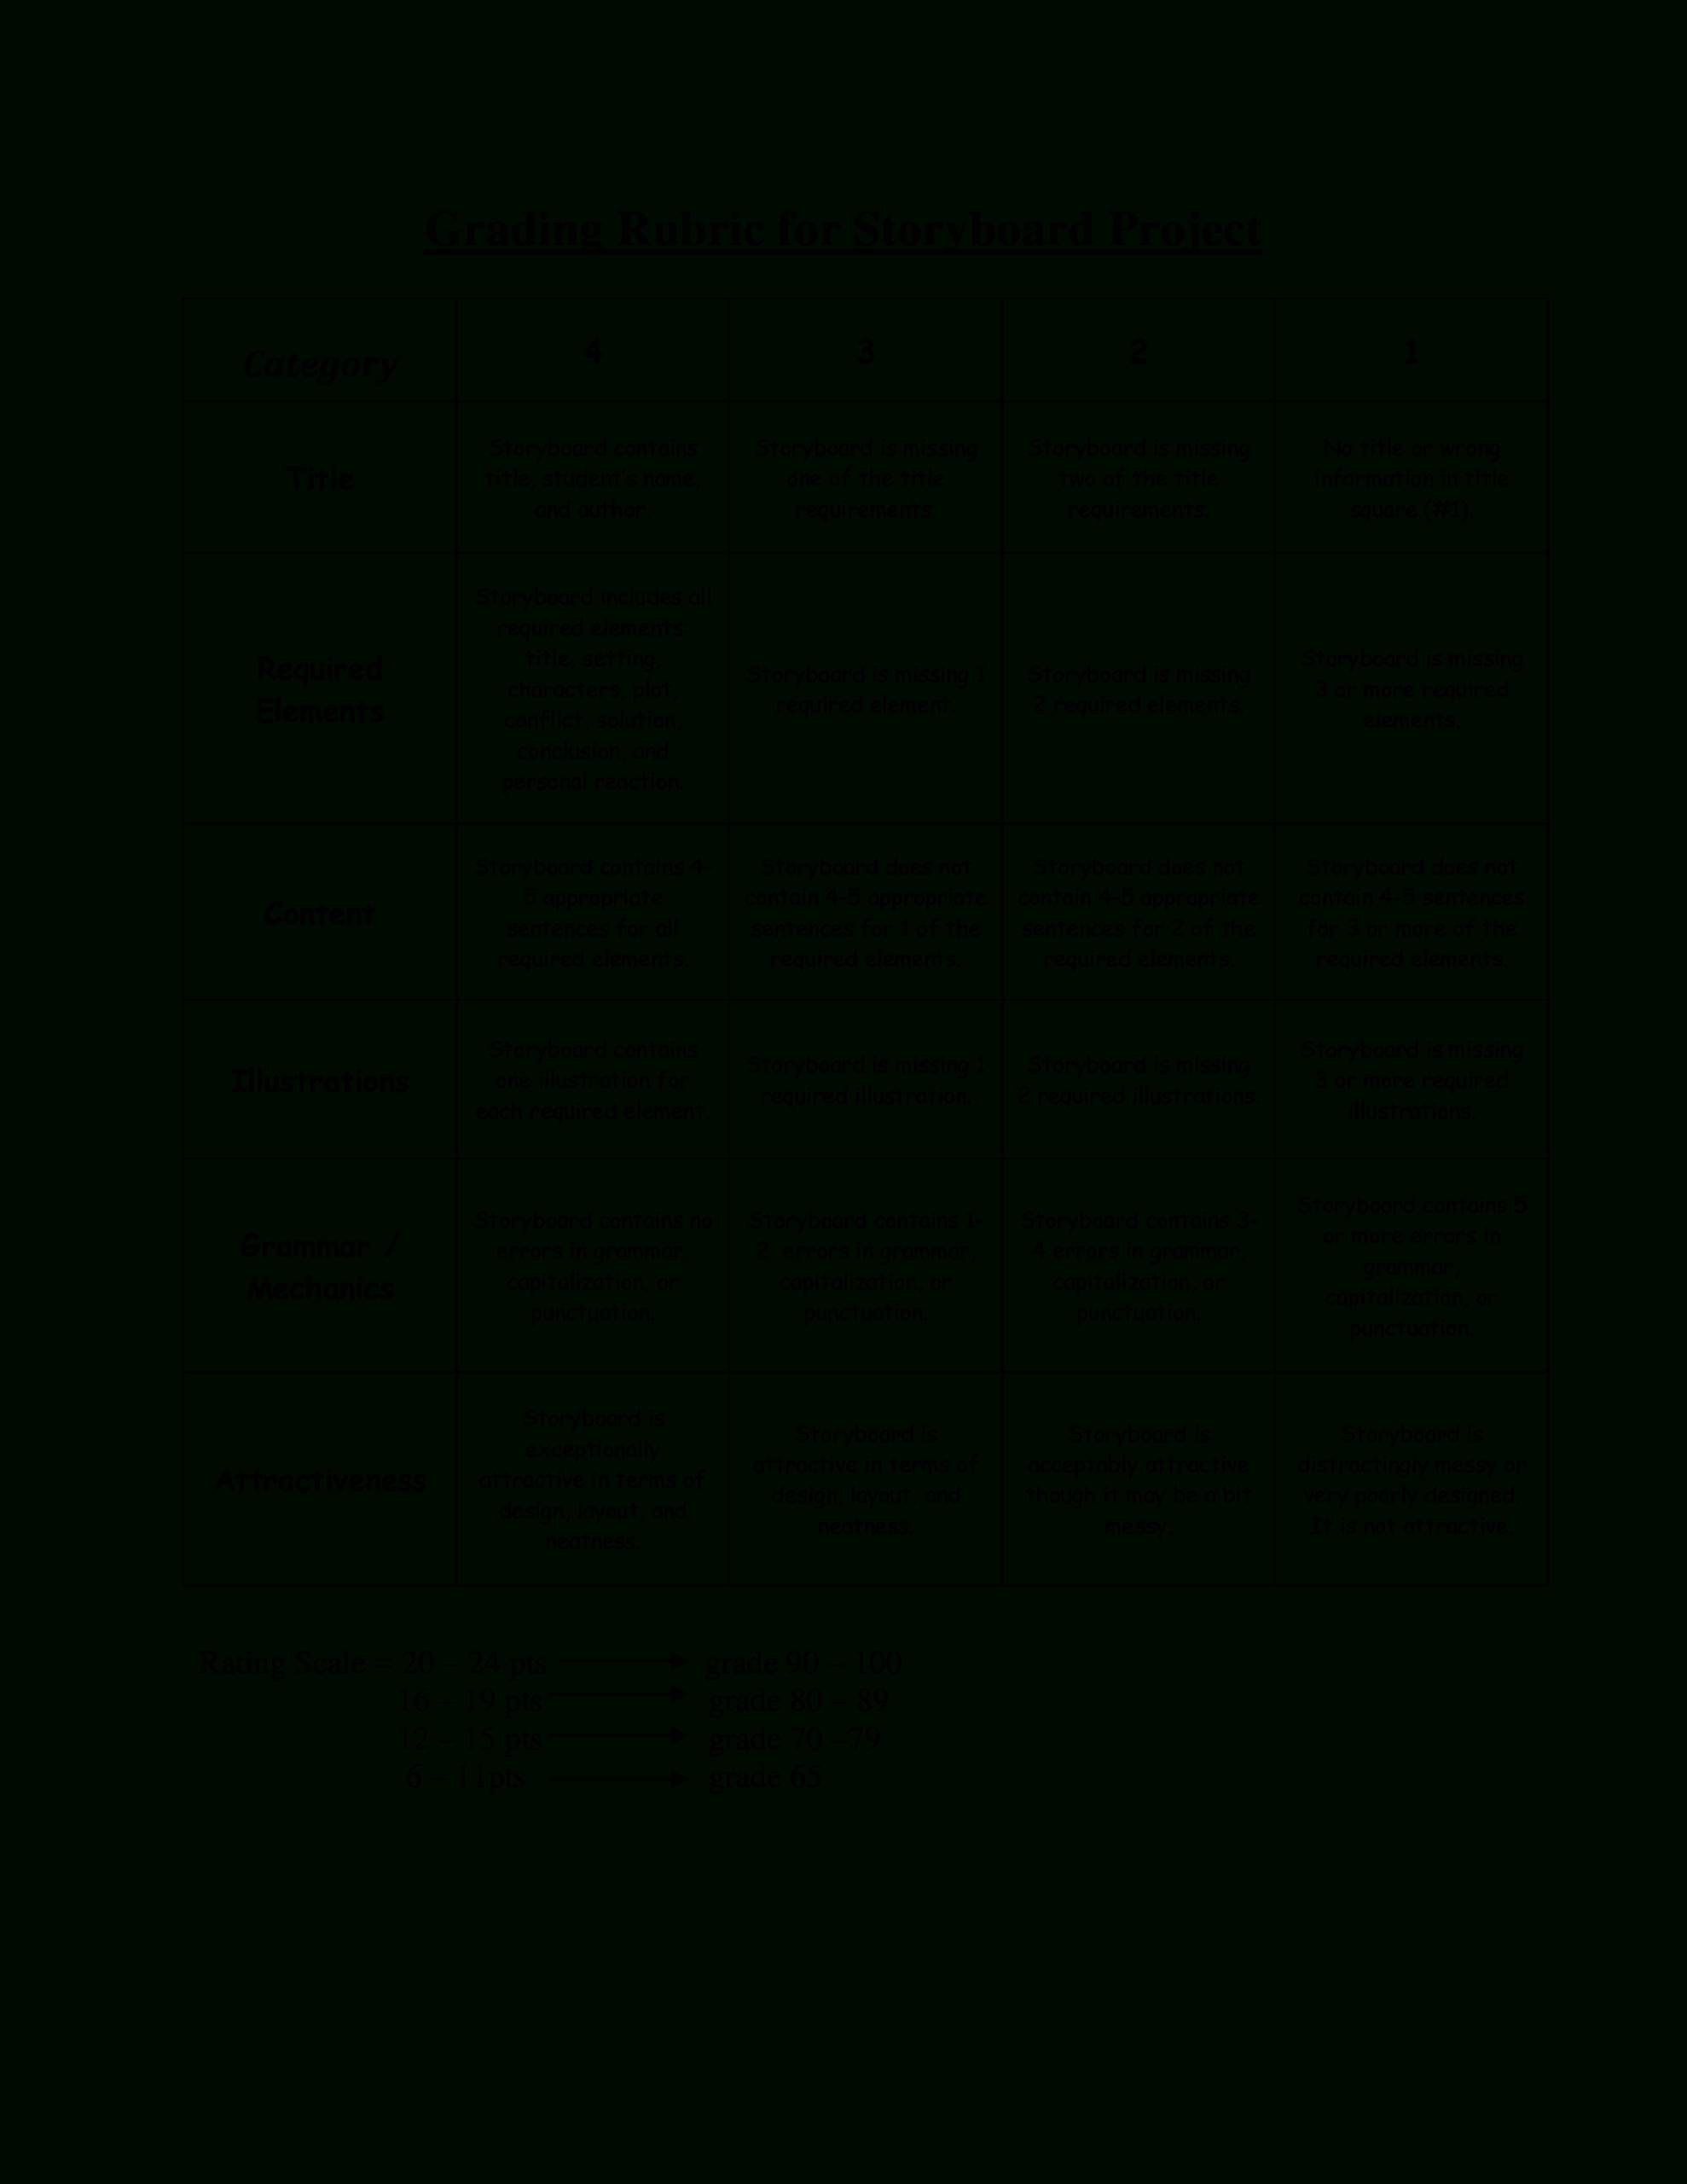 Grading Rubric For Storyboard Project | Templates At Inside Blank Rubric Template